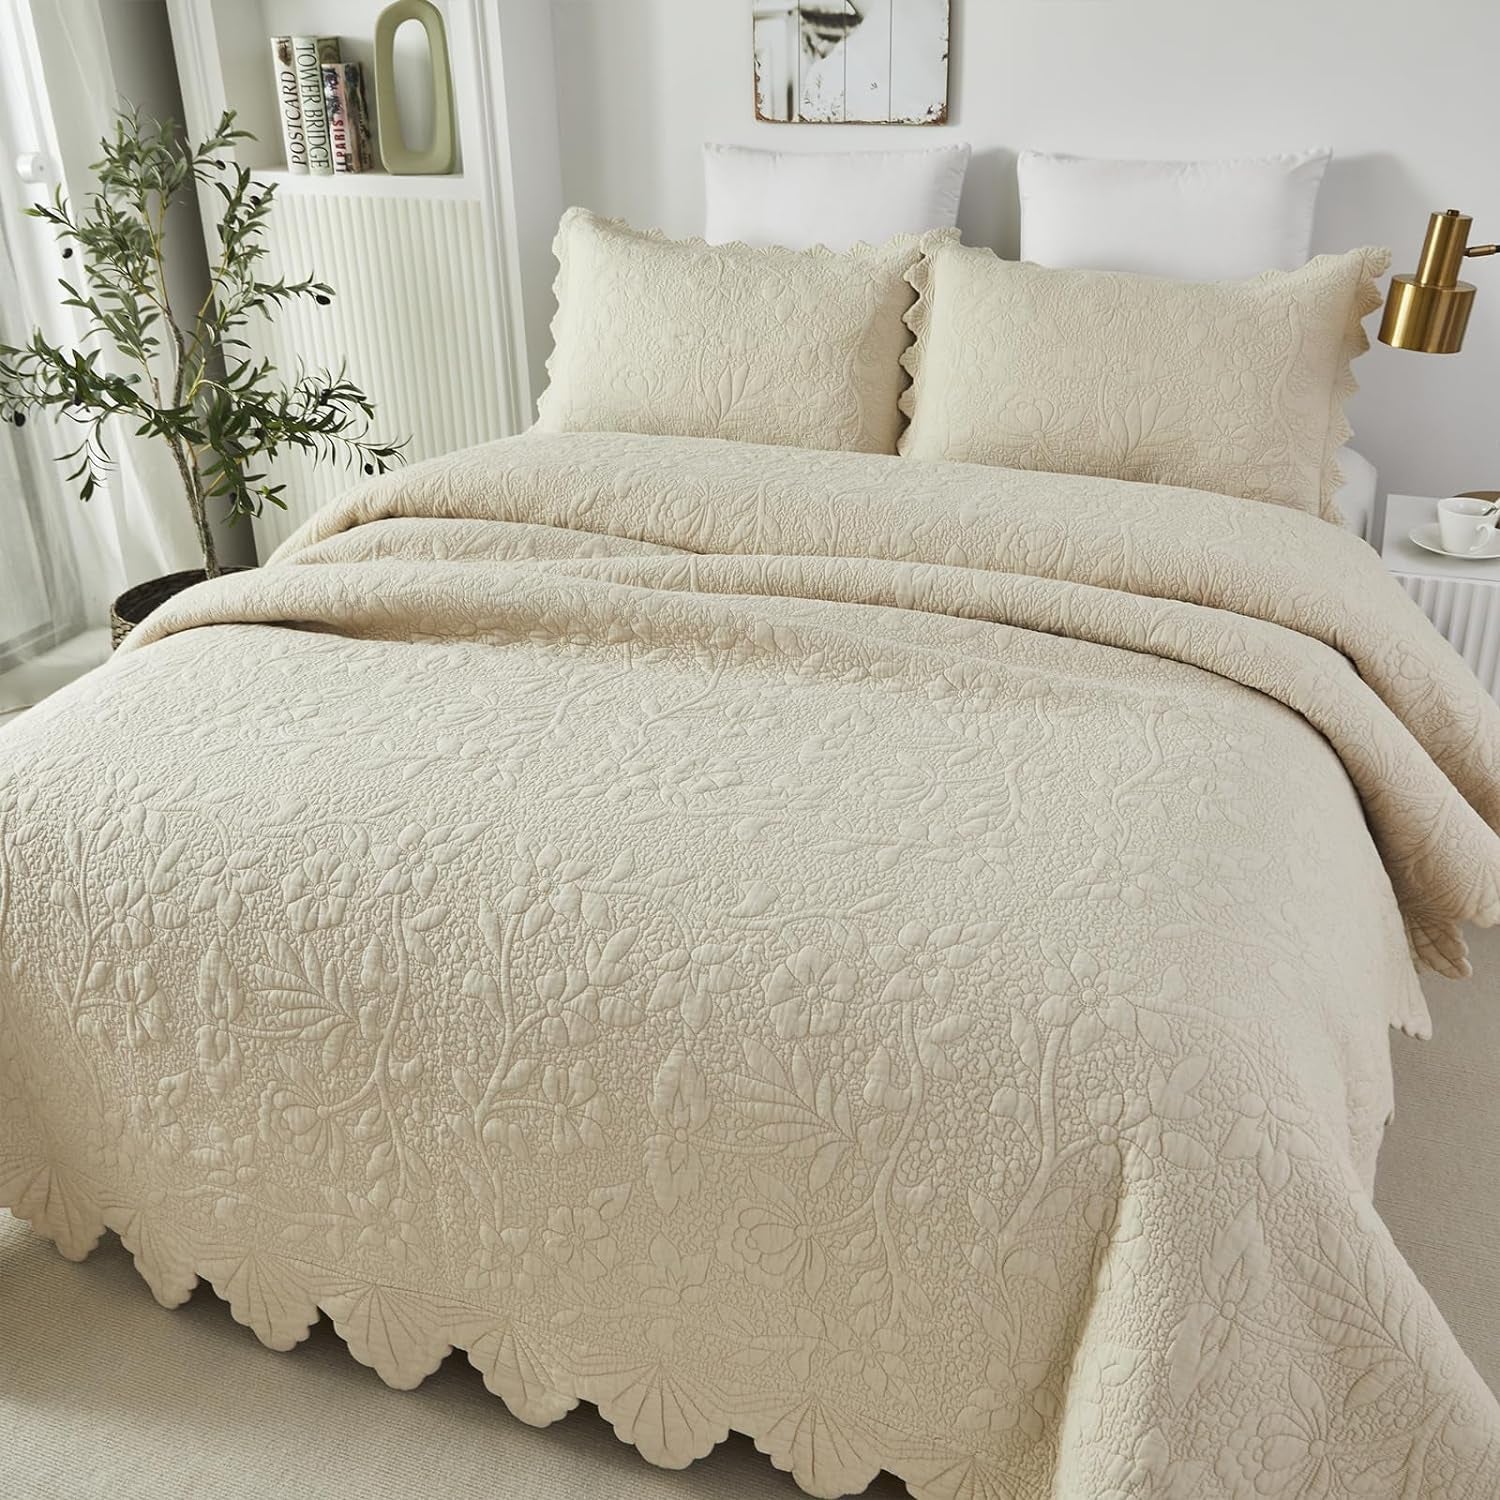 Brandream White Quilts Set Queen Size Bedspreads Farmhouse Bedding 100% Cotton Quilted Bedspreads